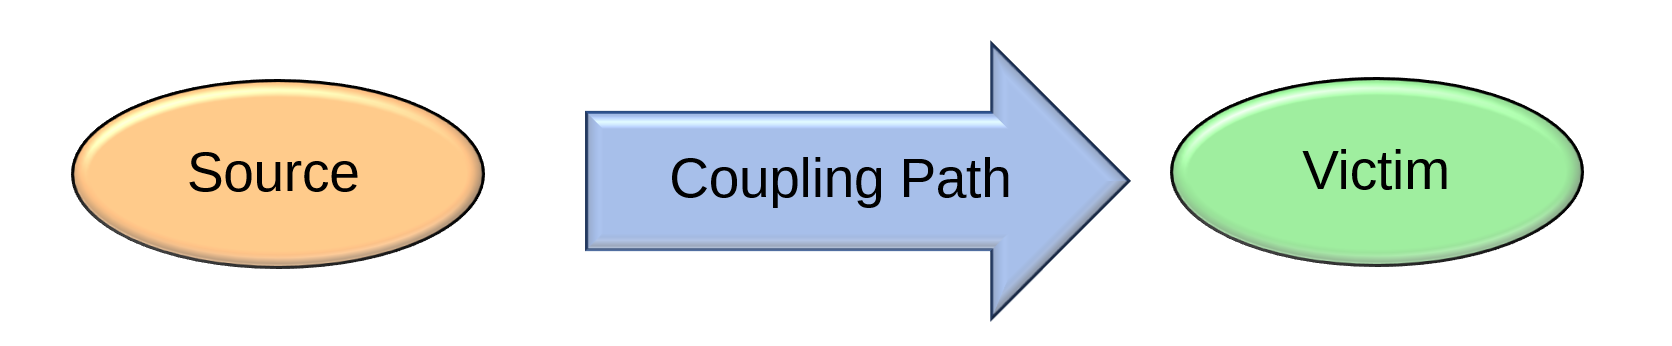 Three essential elements of an EMC problem: Source, Coupling Path, Victim.